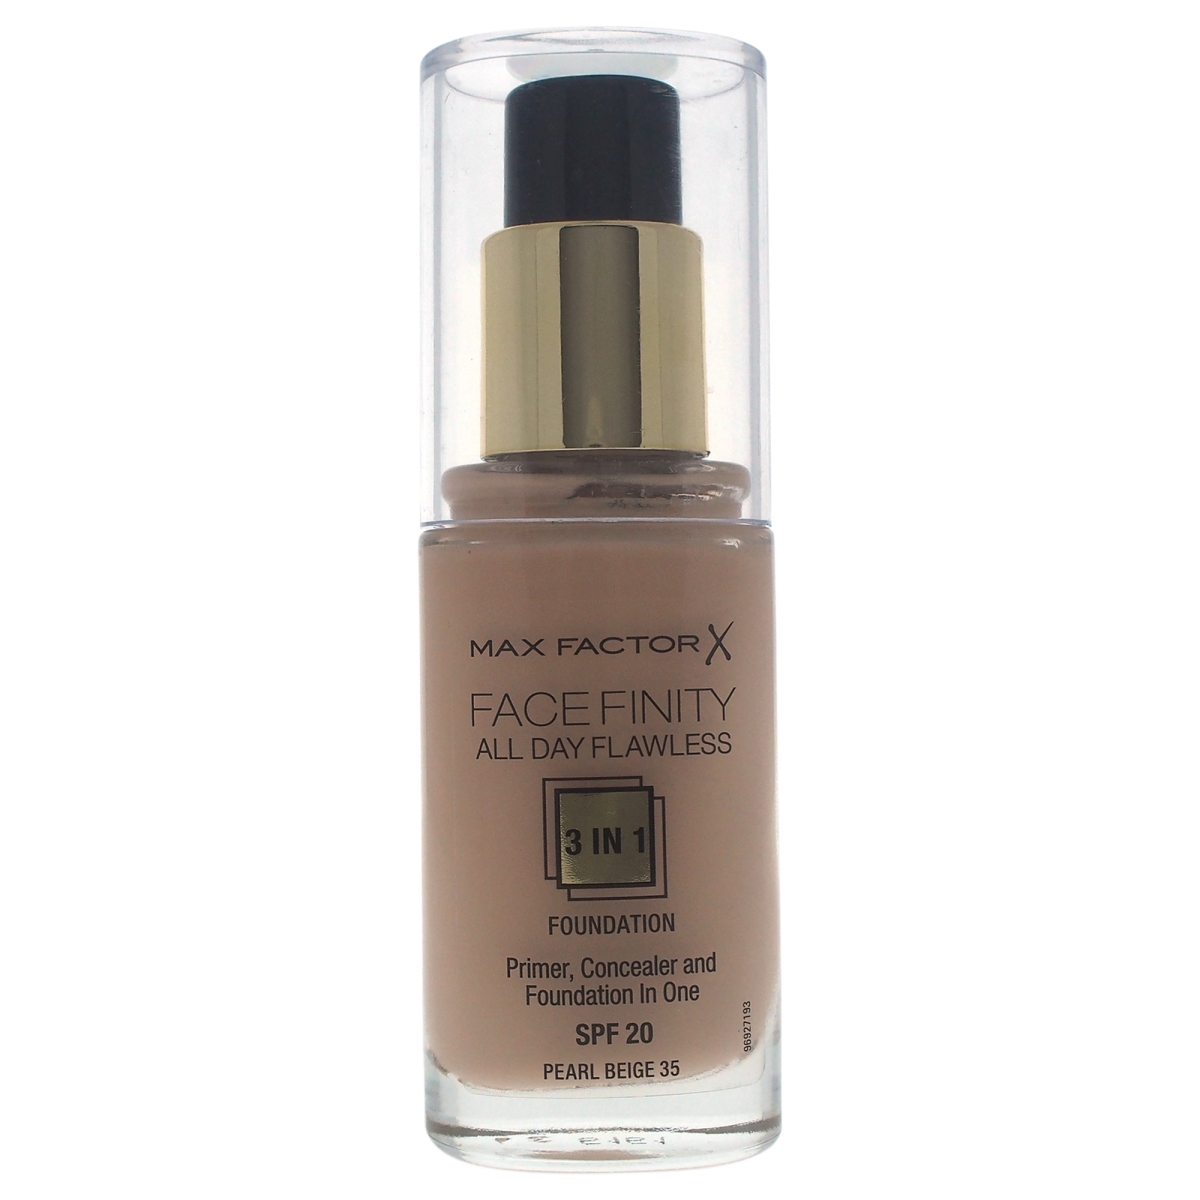 W-c-11178 30 Ml No. 35 Spf 20 Facefinity All Day Flawless 3-in-1 Foundation - Pearl Beige For Women